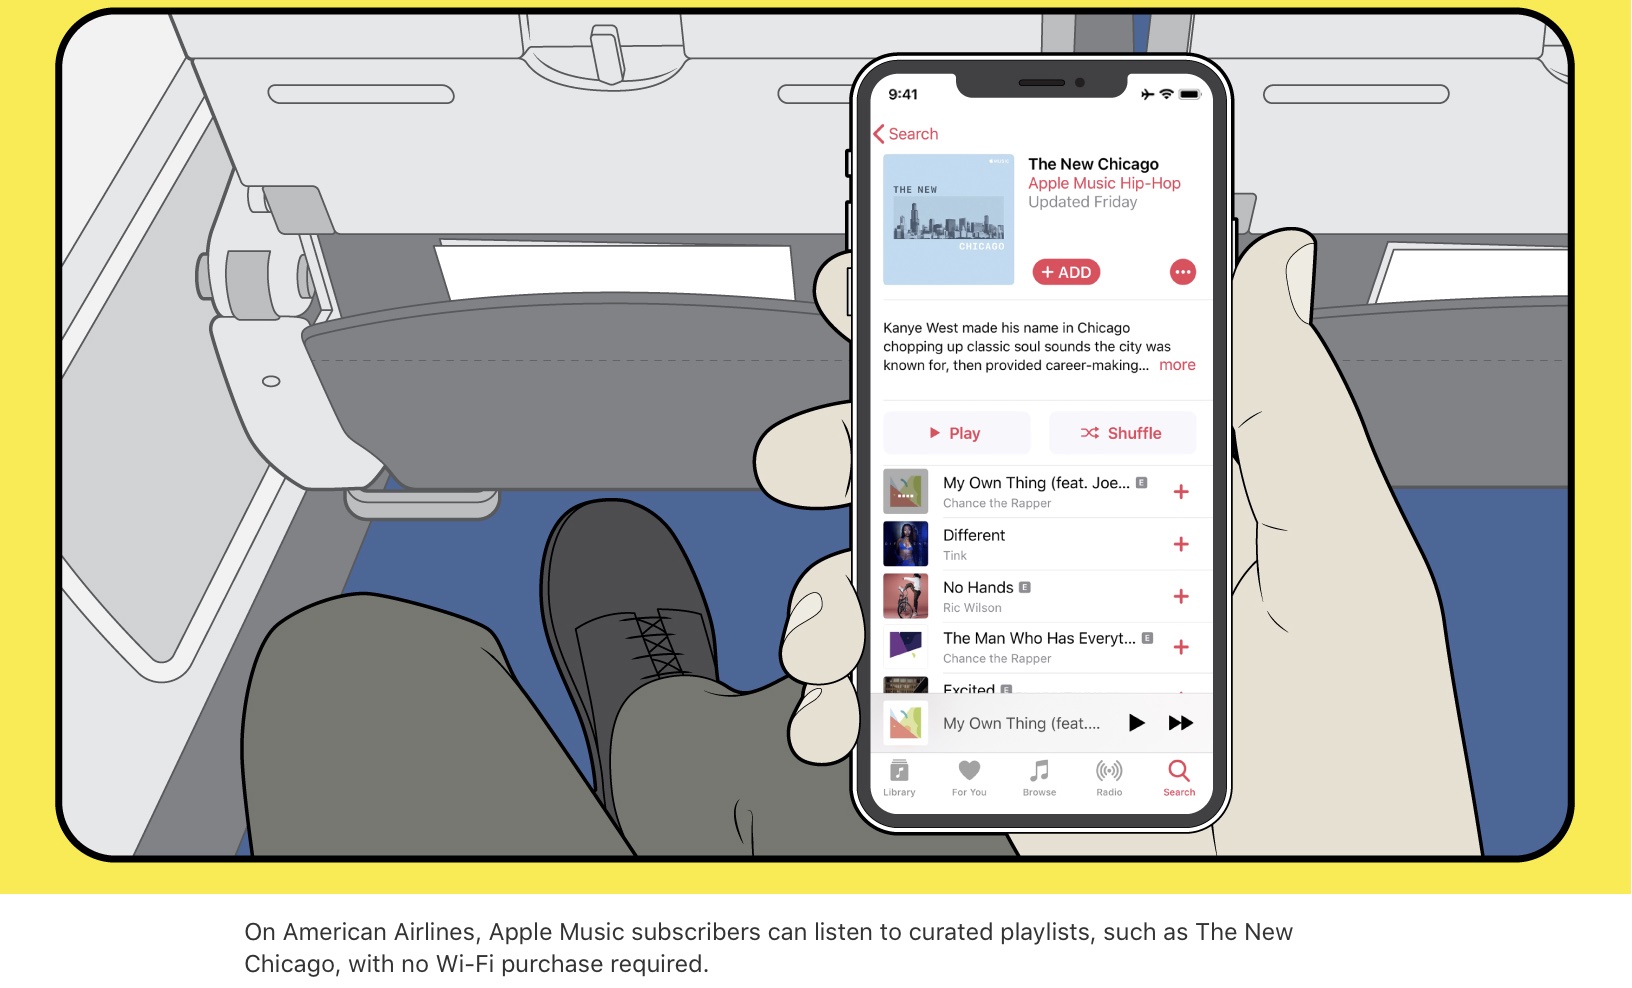 Apple Music takes flight on American Airlines